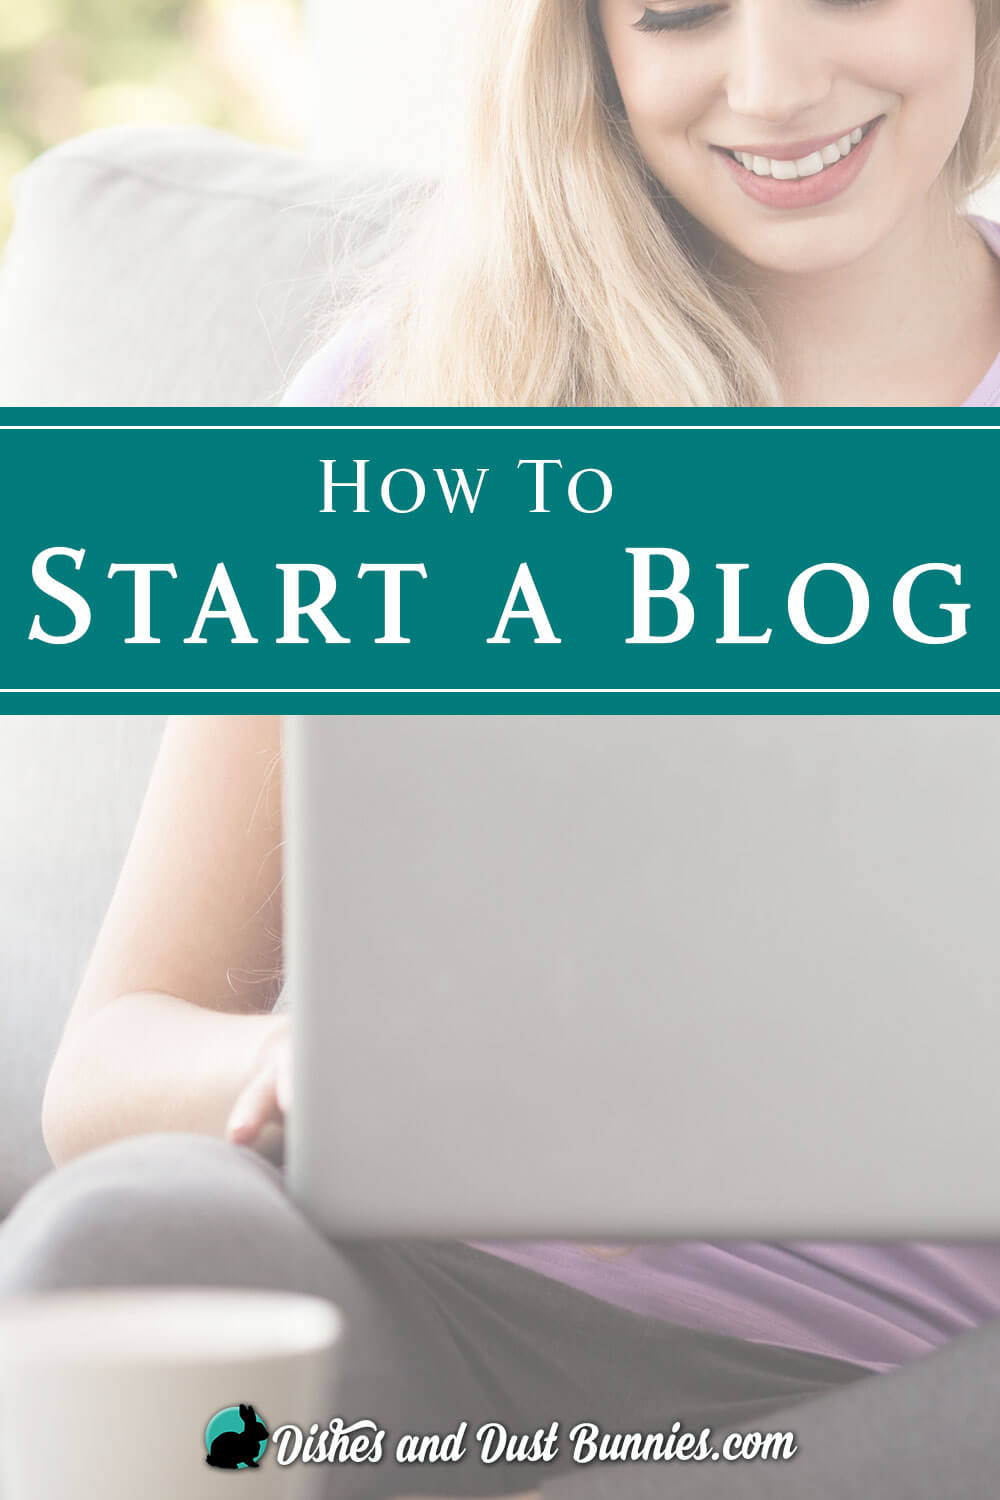 How to Start a Blog from dishesanddustbunnies.com